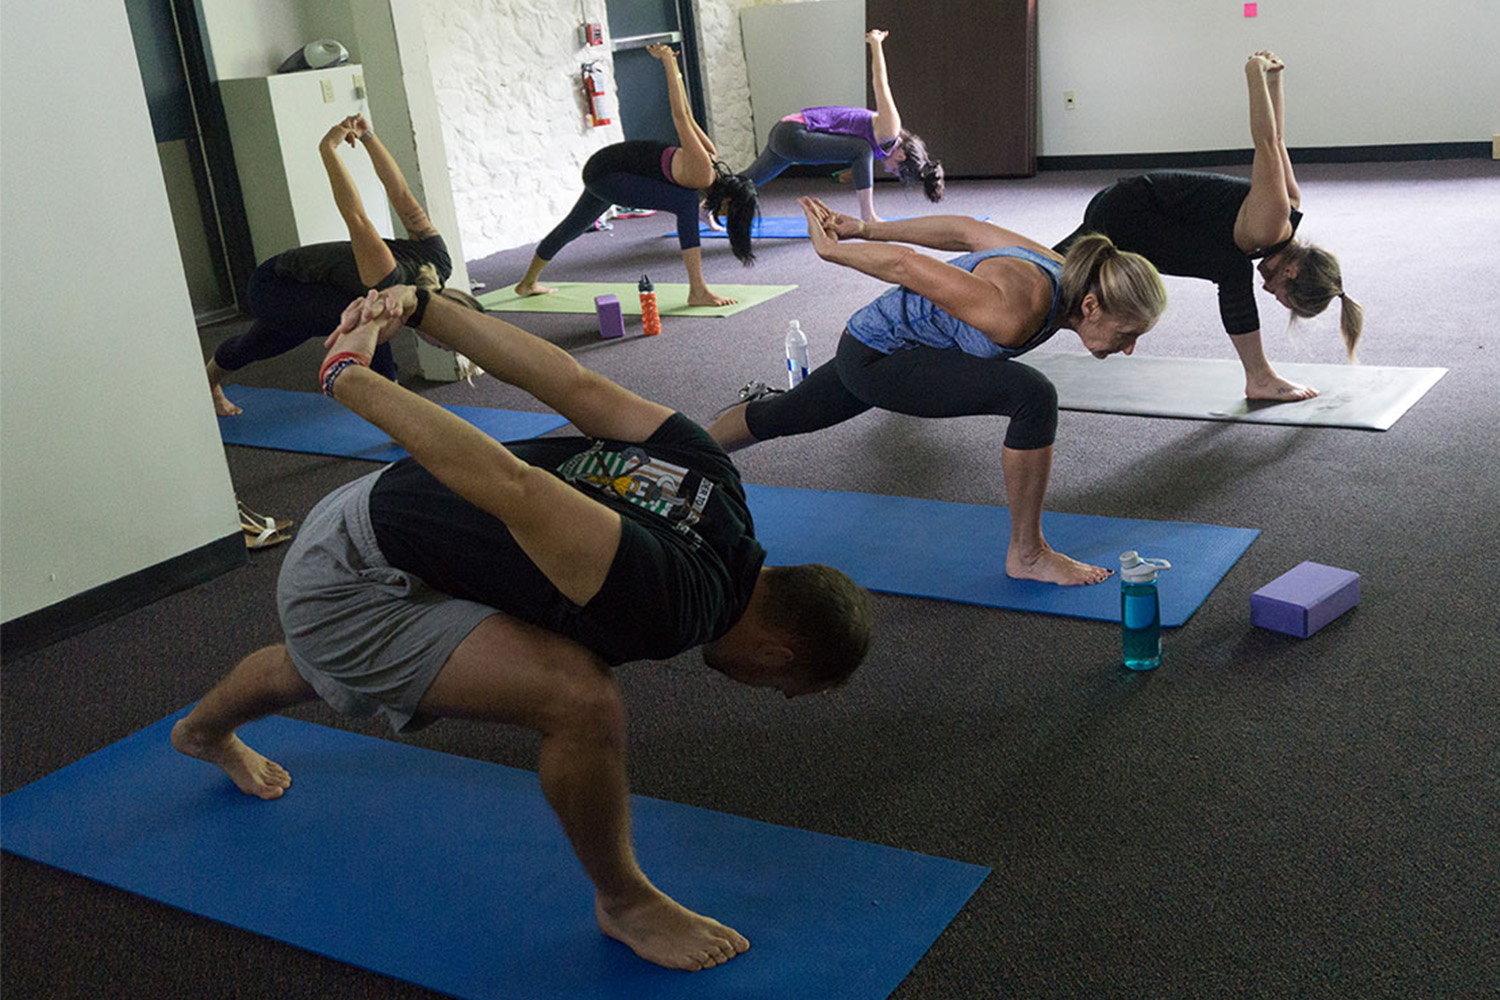 Joe Ferolito and other staff members stretch during a weekly yoga class